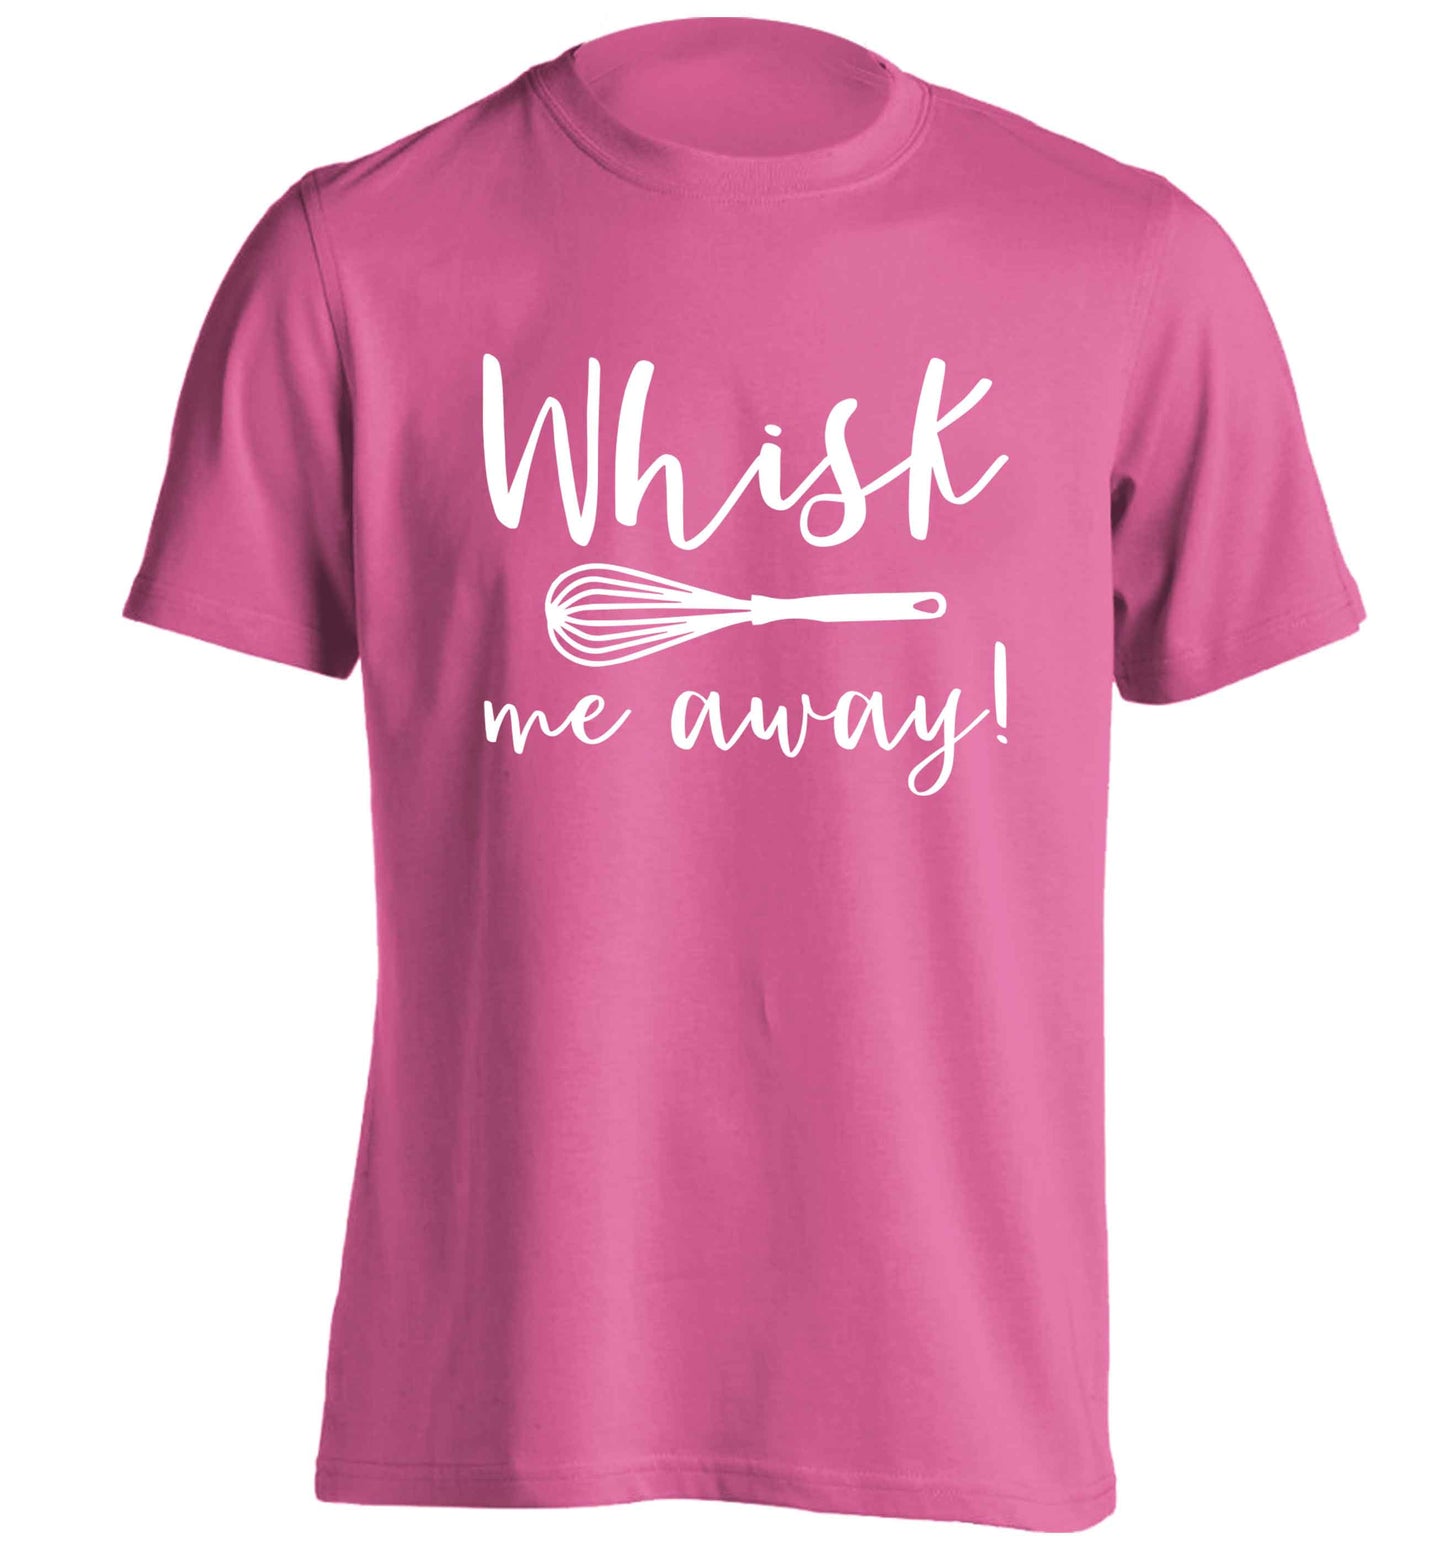 Whisk me away adults unisex pink Tshirt 2XL